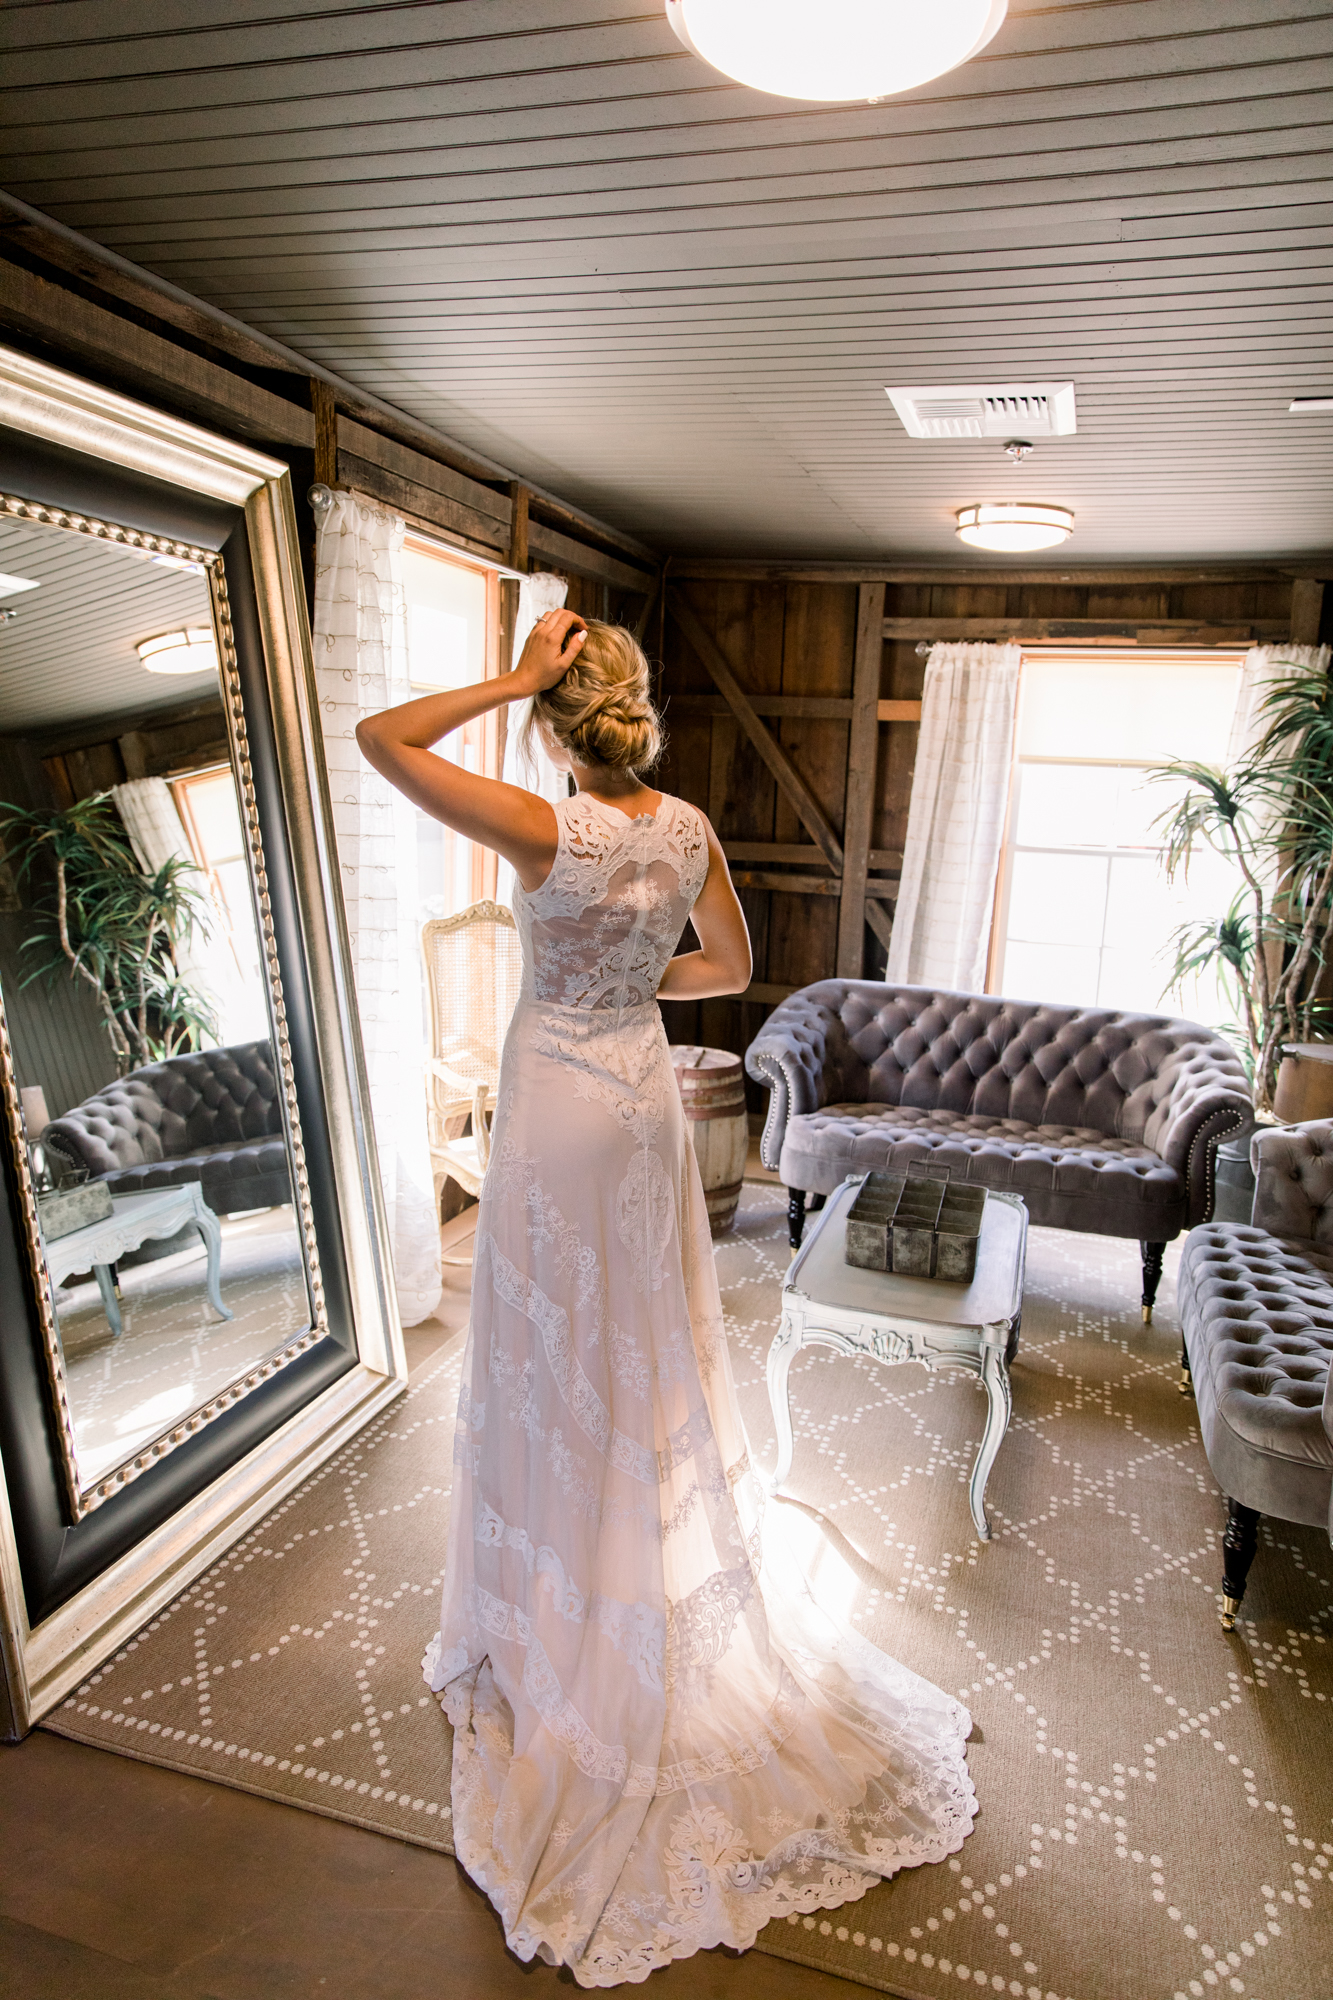 Bride in Dressing Room of VIP Loft at The Barns